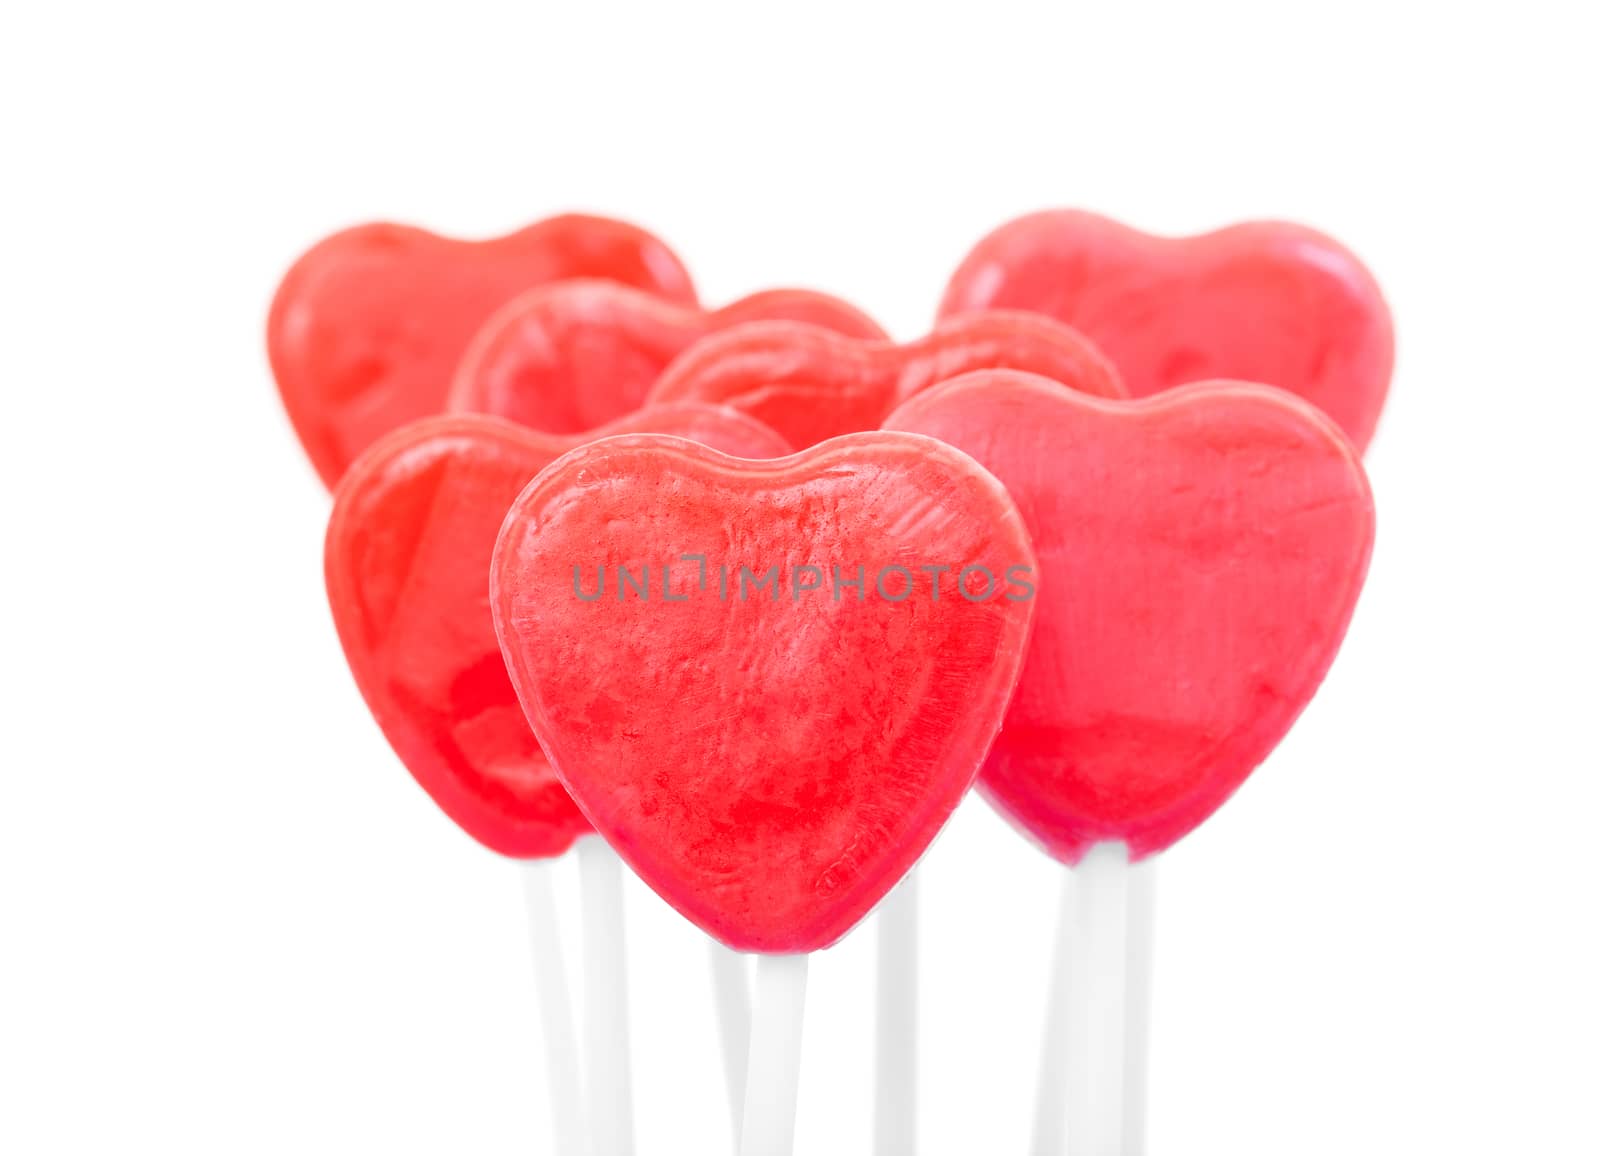 Red candy heart lollipops.  Shot on white background.